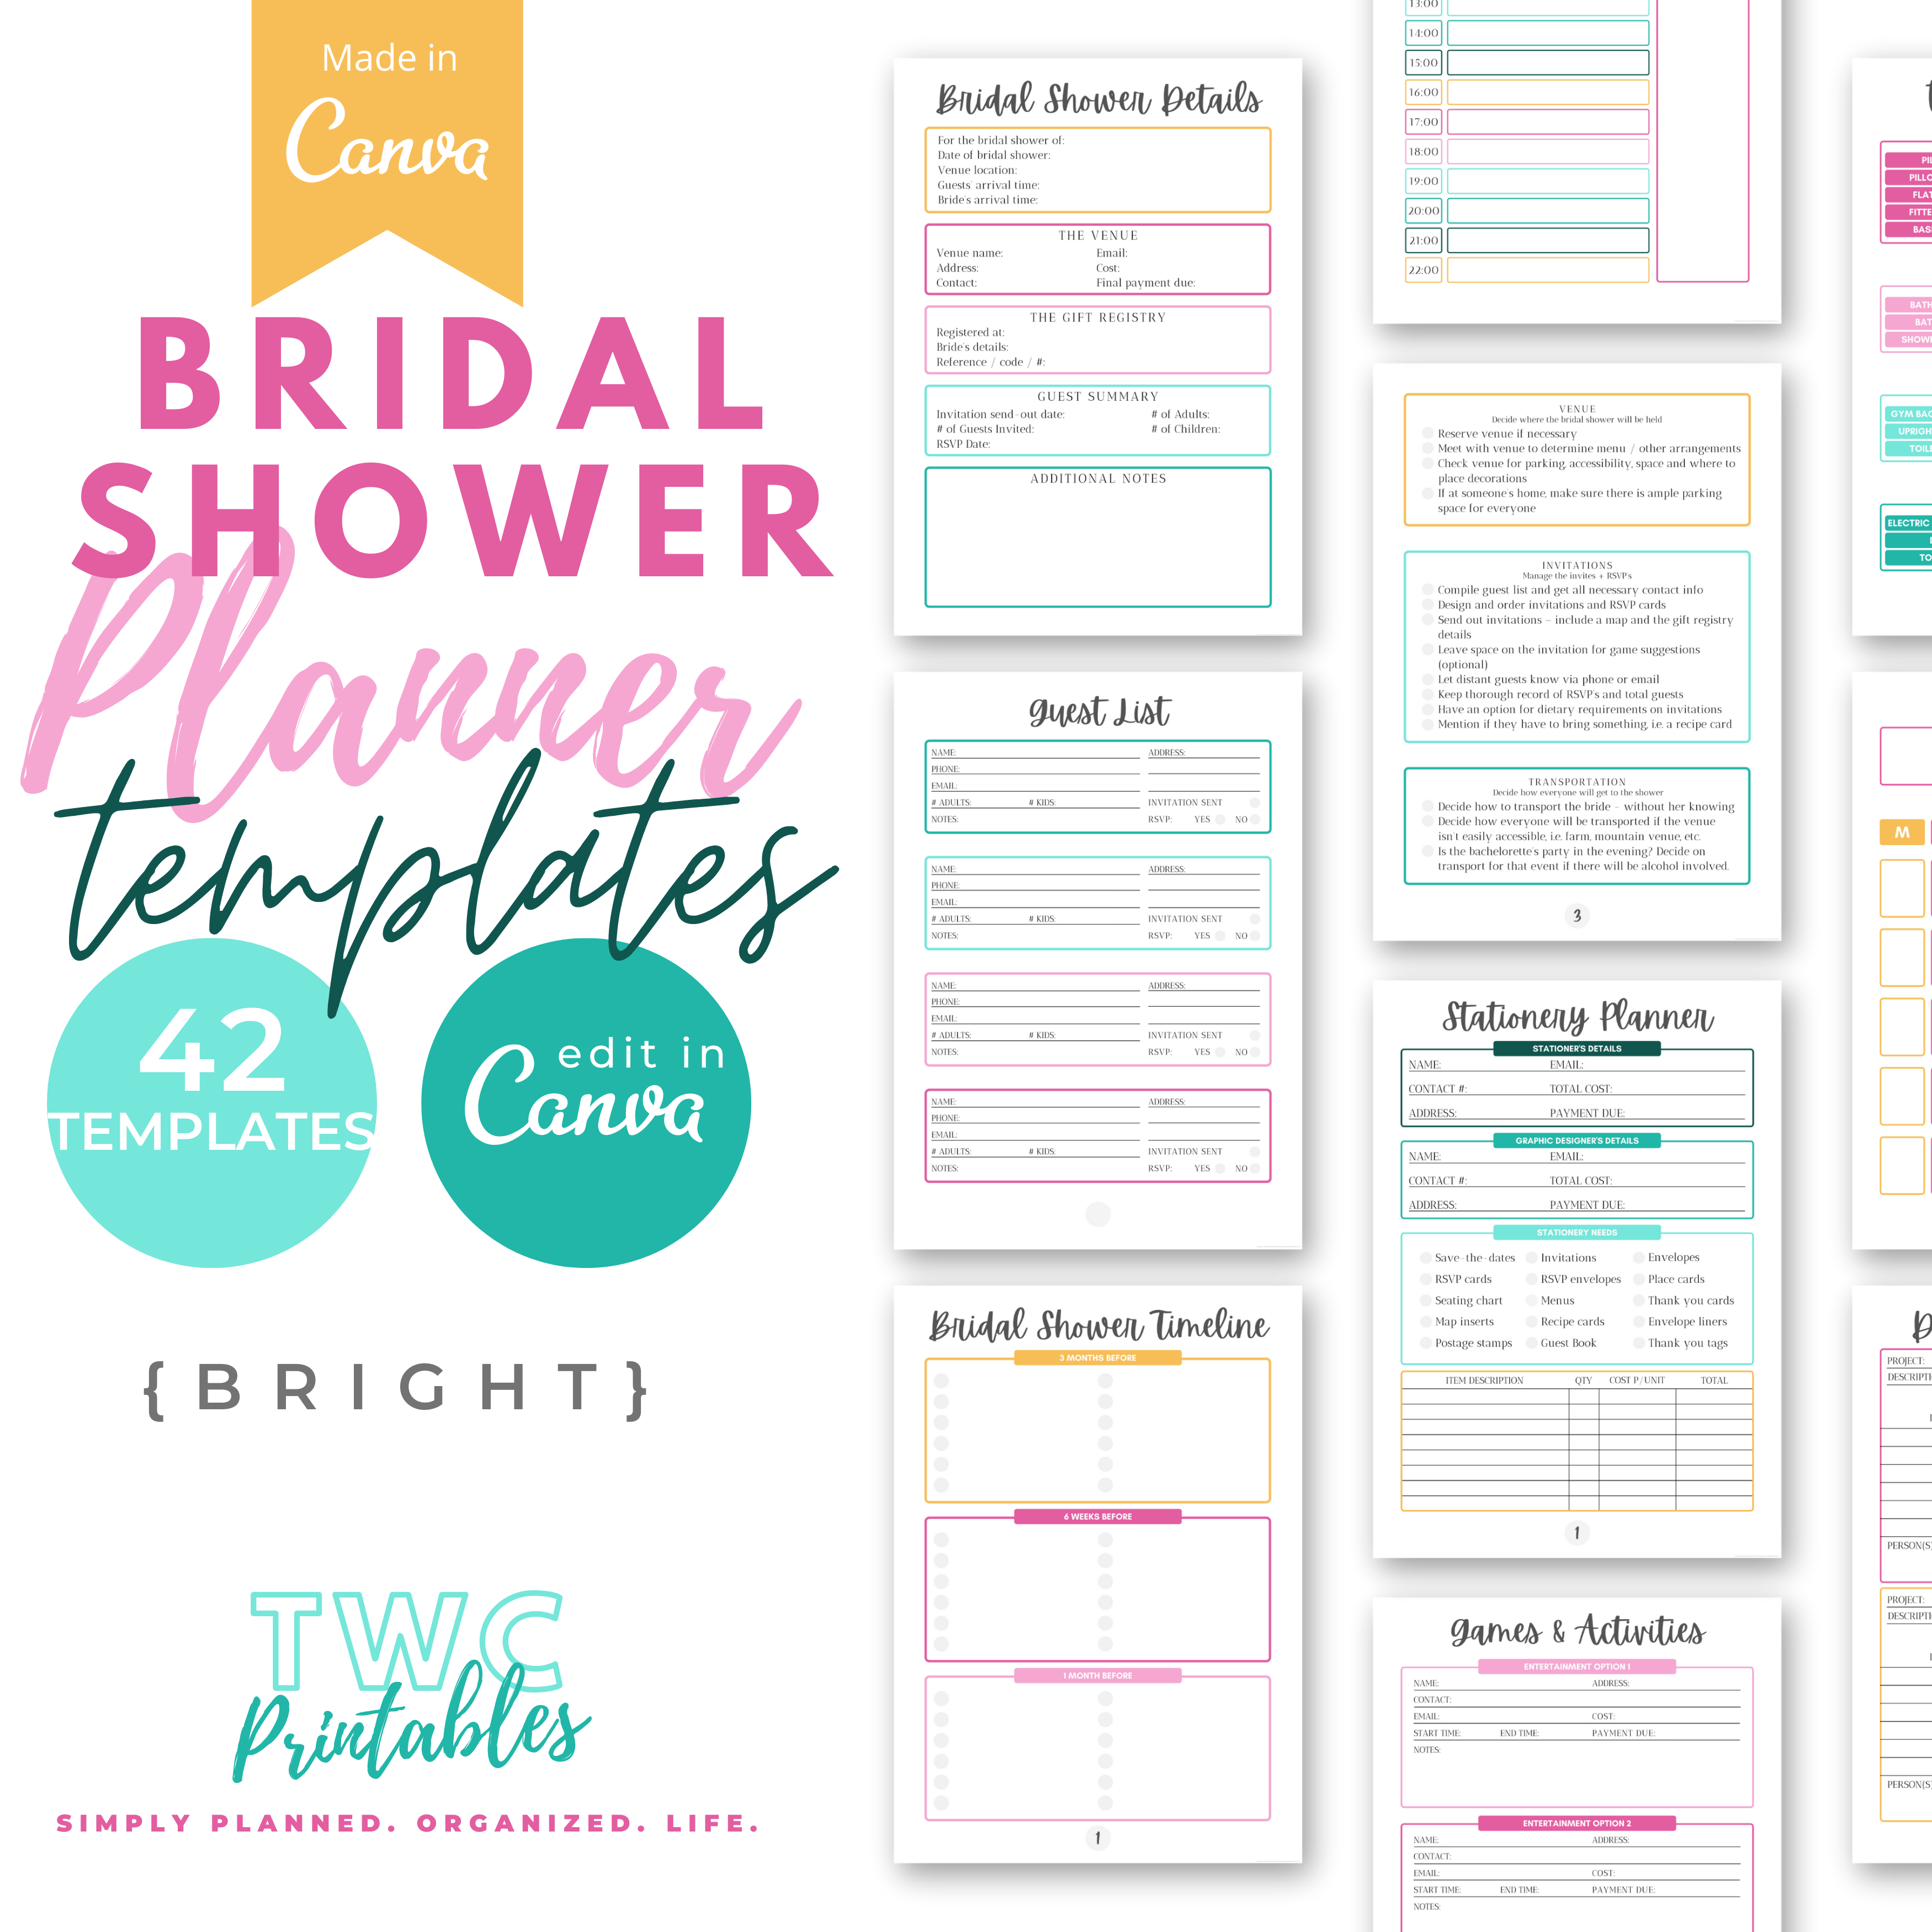 The bridal shower planner will help you to plan all aspects of this beautiful event - from bridal shower gifts, to favors, food and decor, this is the planner you need! Simply edit this template with the free version of Canva - you can change the entire design, including fonts, colors, elements and much more! A free Canva guide for beginners is included in your purchase of this listing.